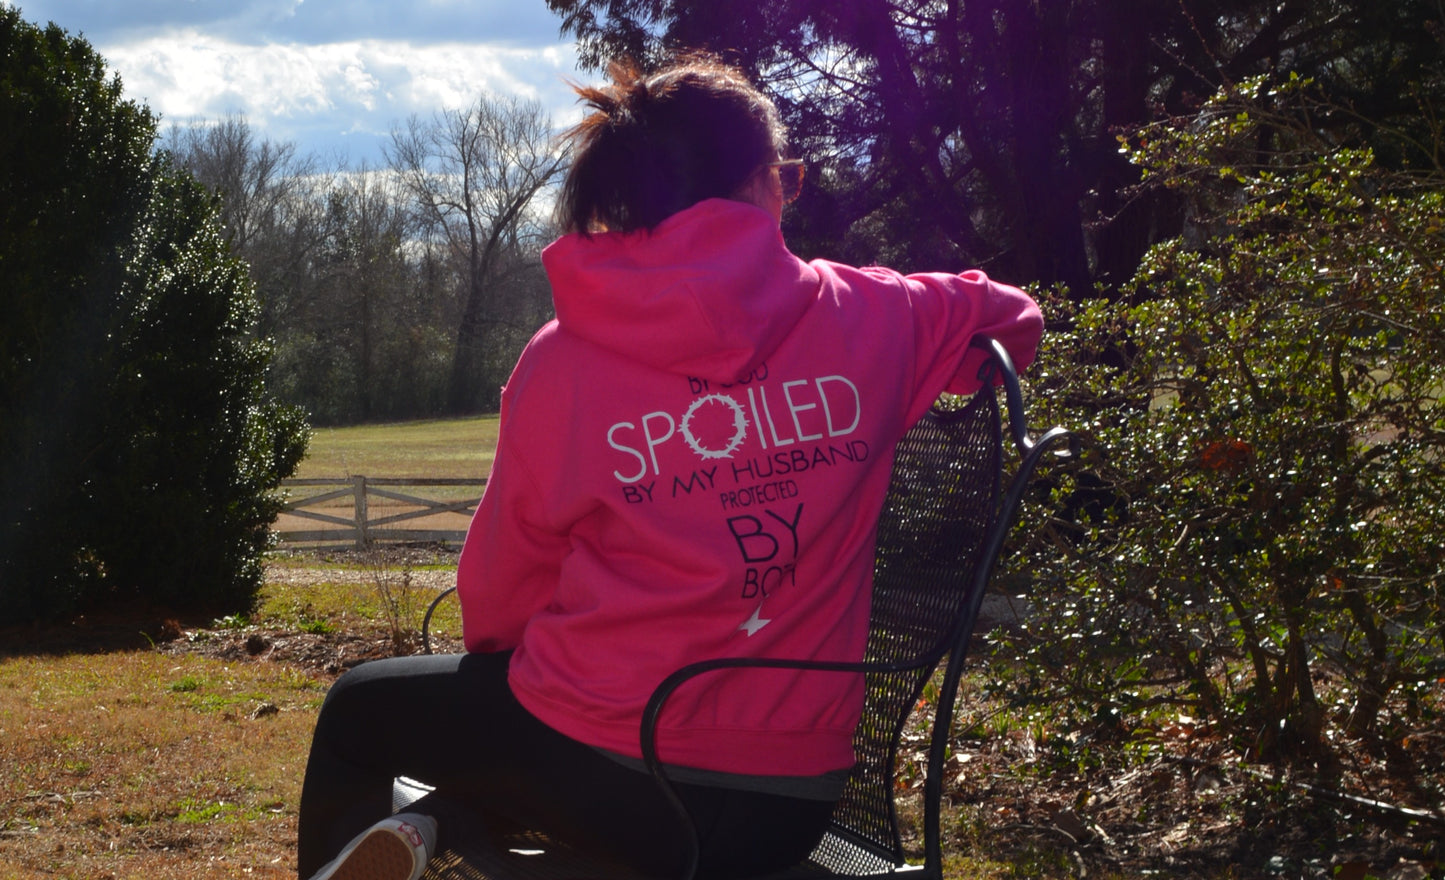 Hot pink Christian Hoodie saying Blessed by God Spoiled by my husband and protected by both